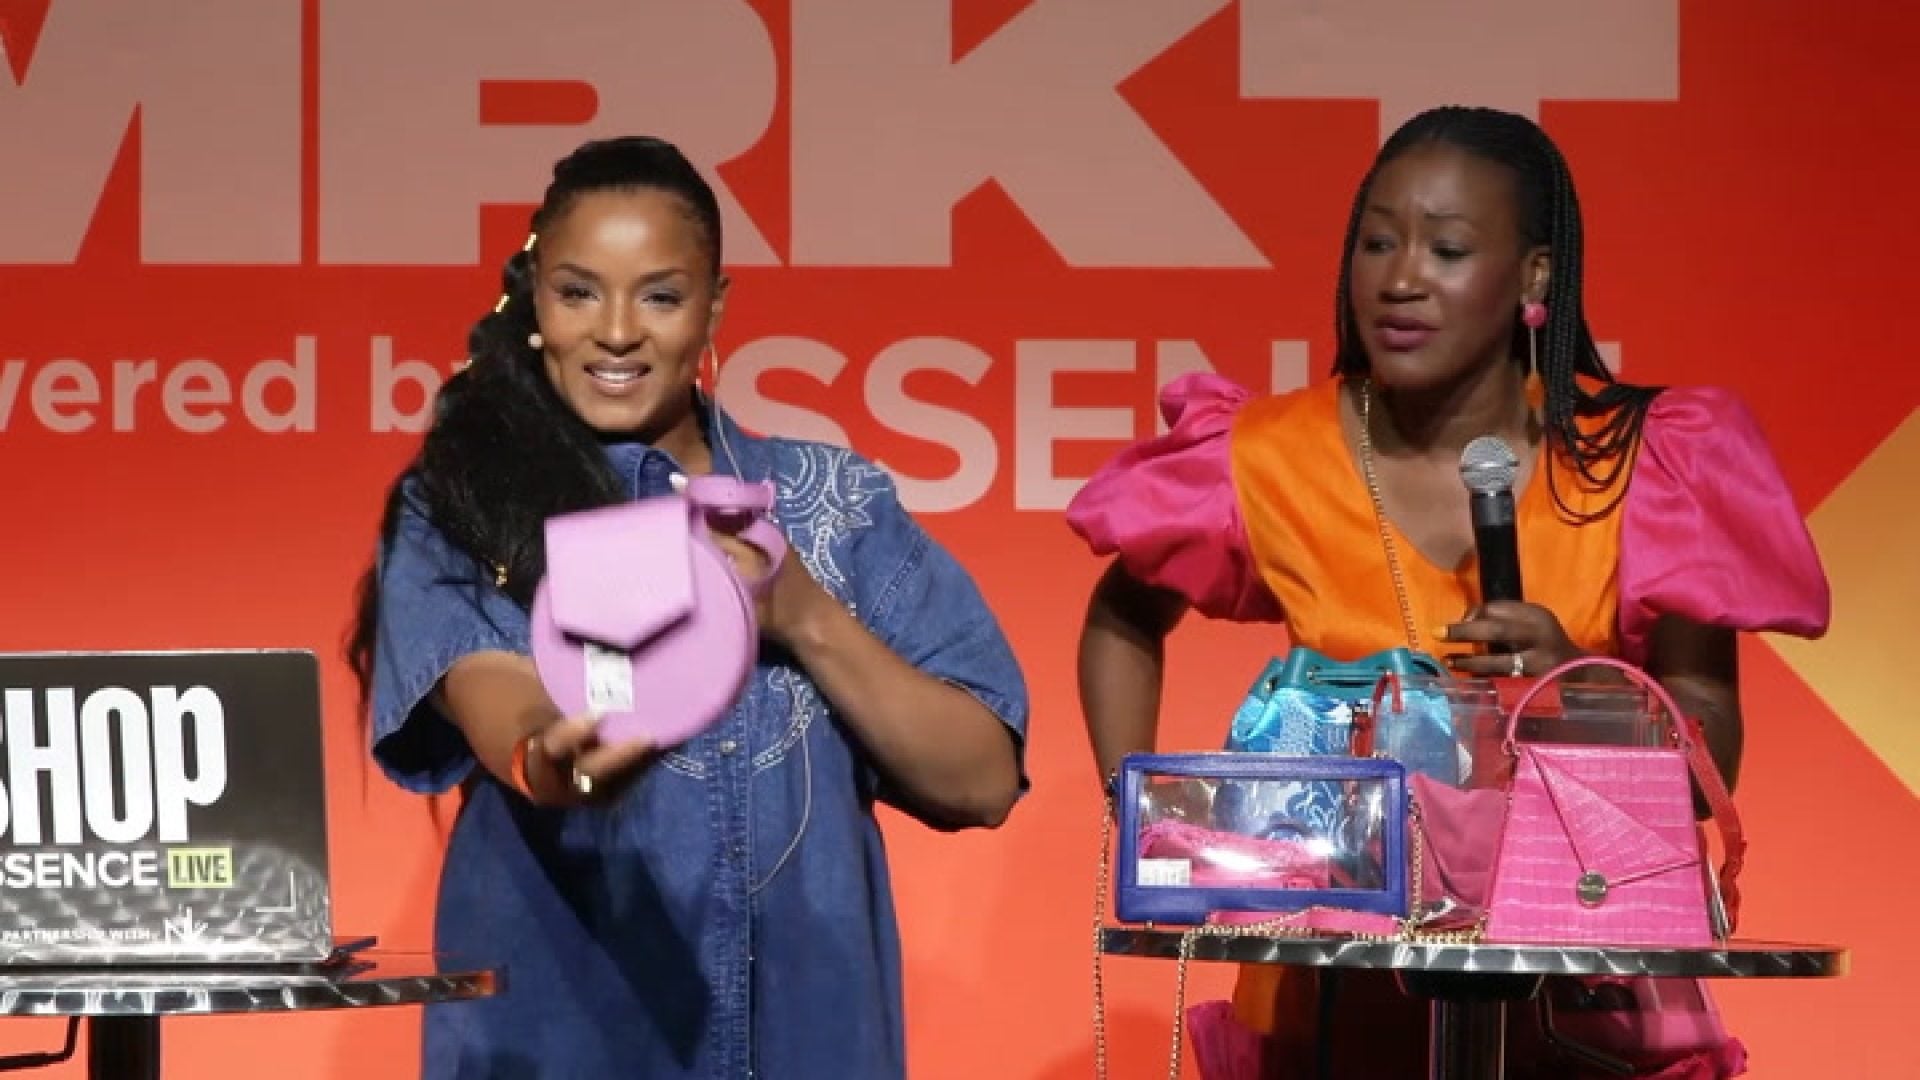 WATCH: Target Stage Moment – Shop Essence Live